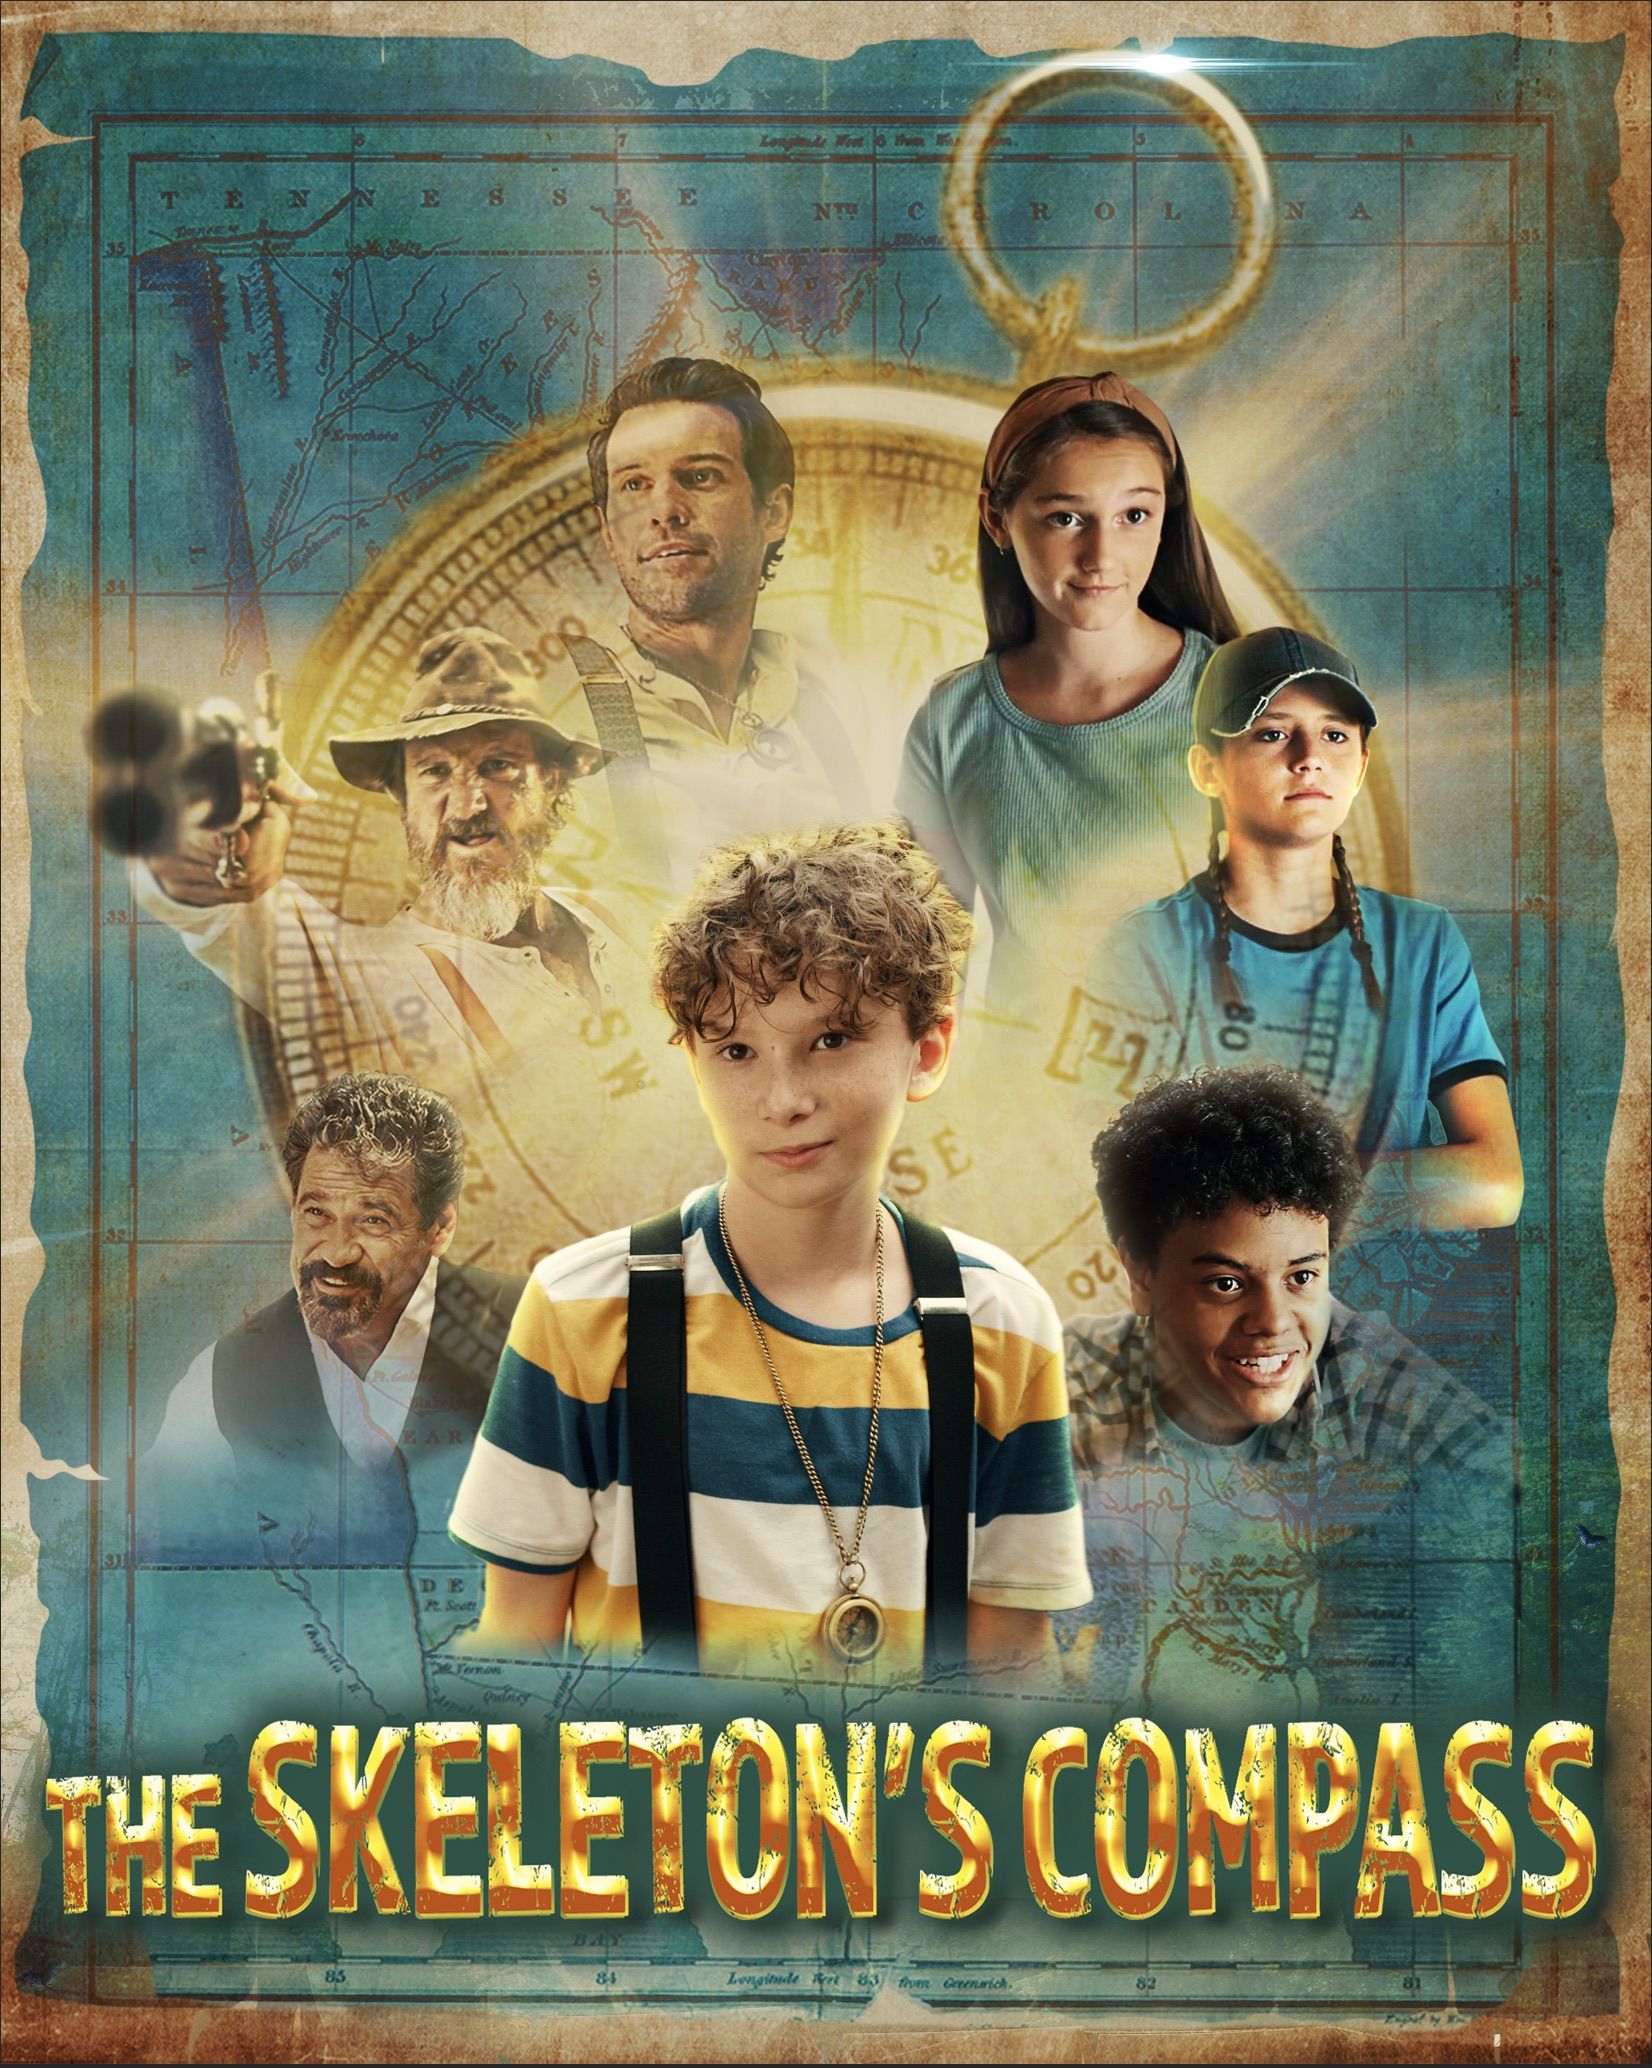 The Skeletons Compass (2022) English HDRip download full movie